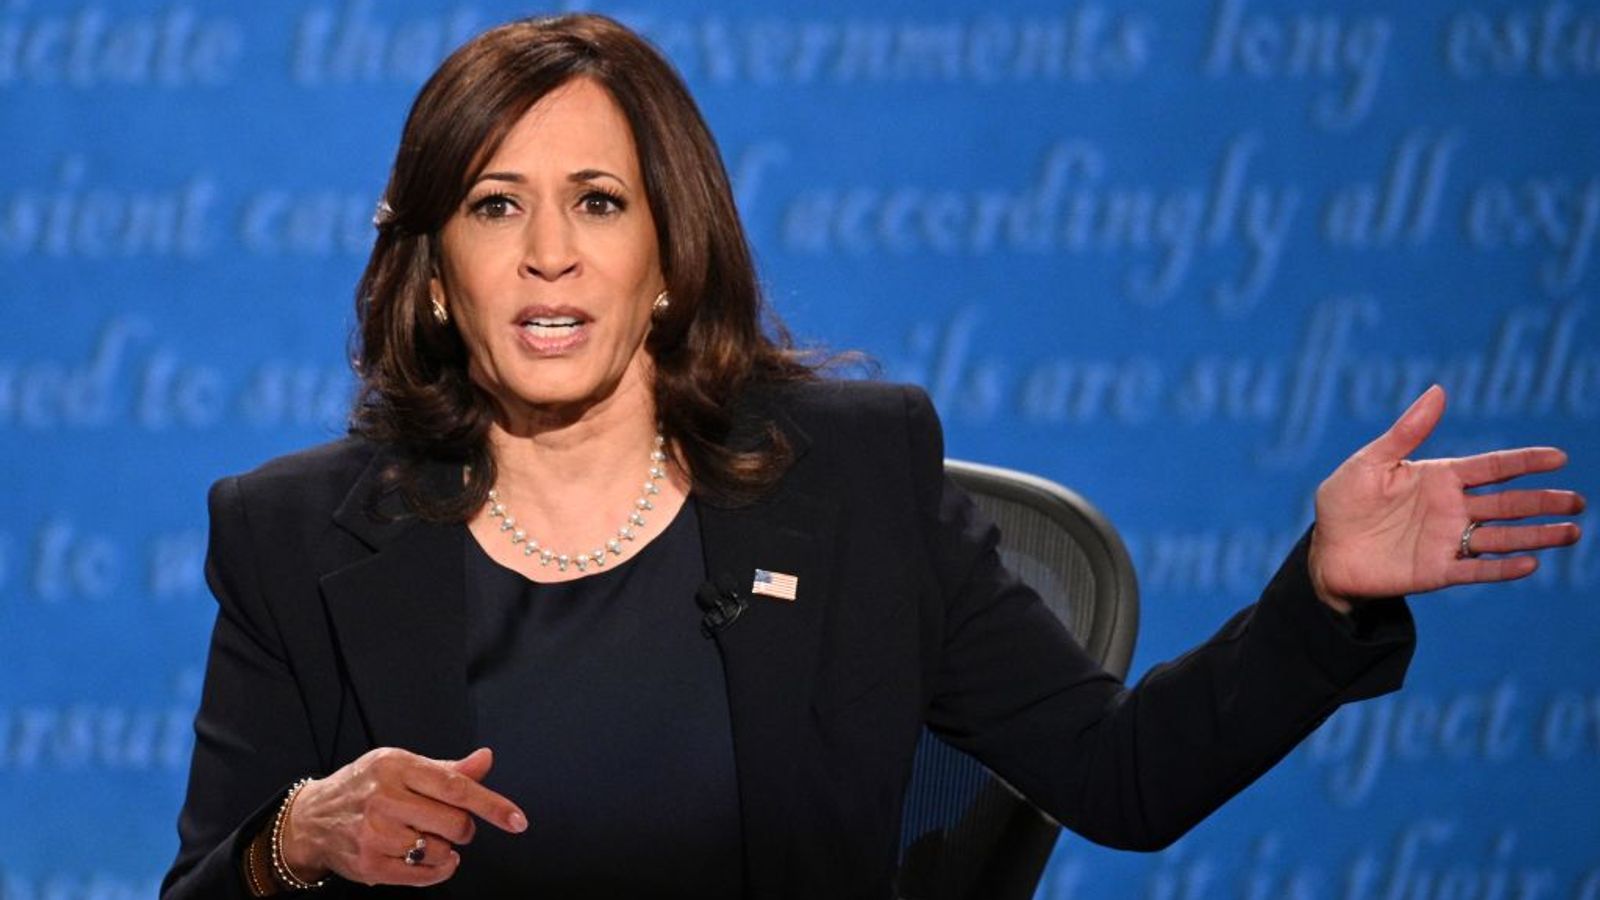 Kamala Harris has suspended in-person events until Monday